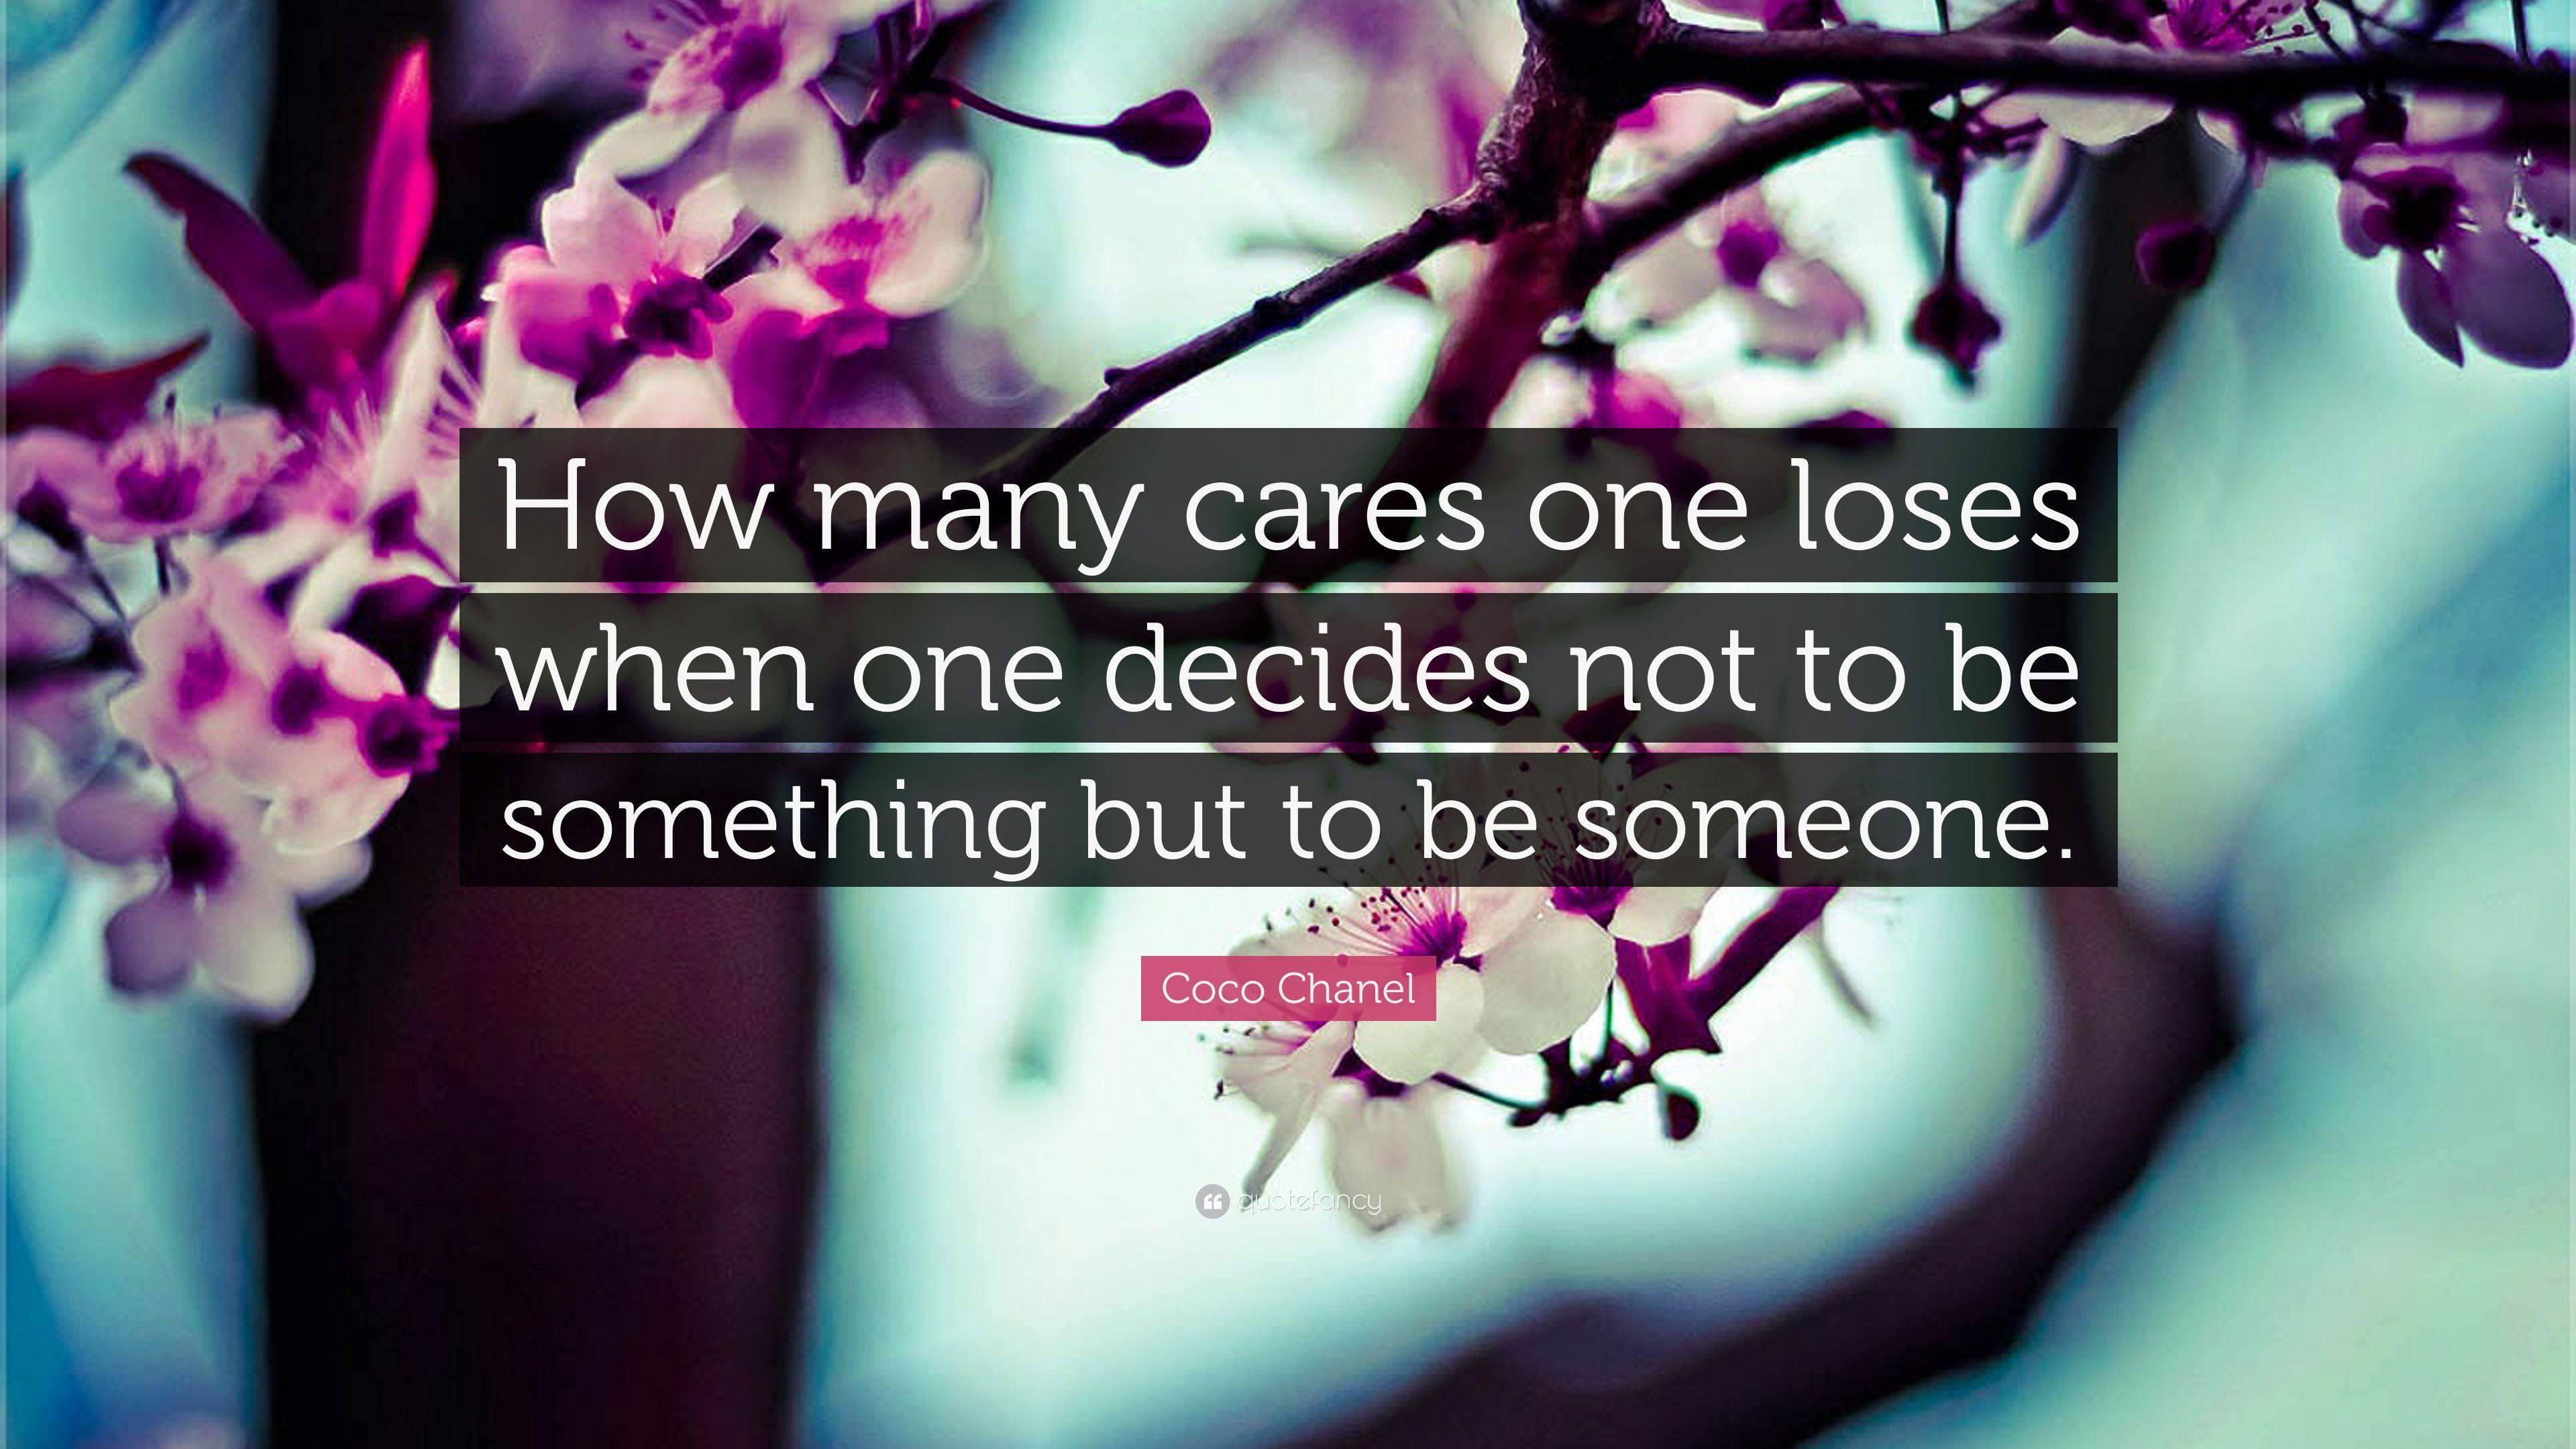 Coco Chanel Quote: "How many cares one loses when one decides not 